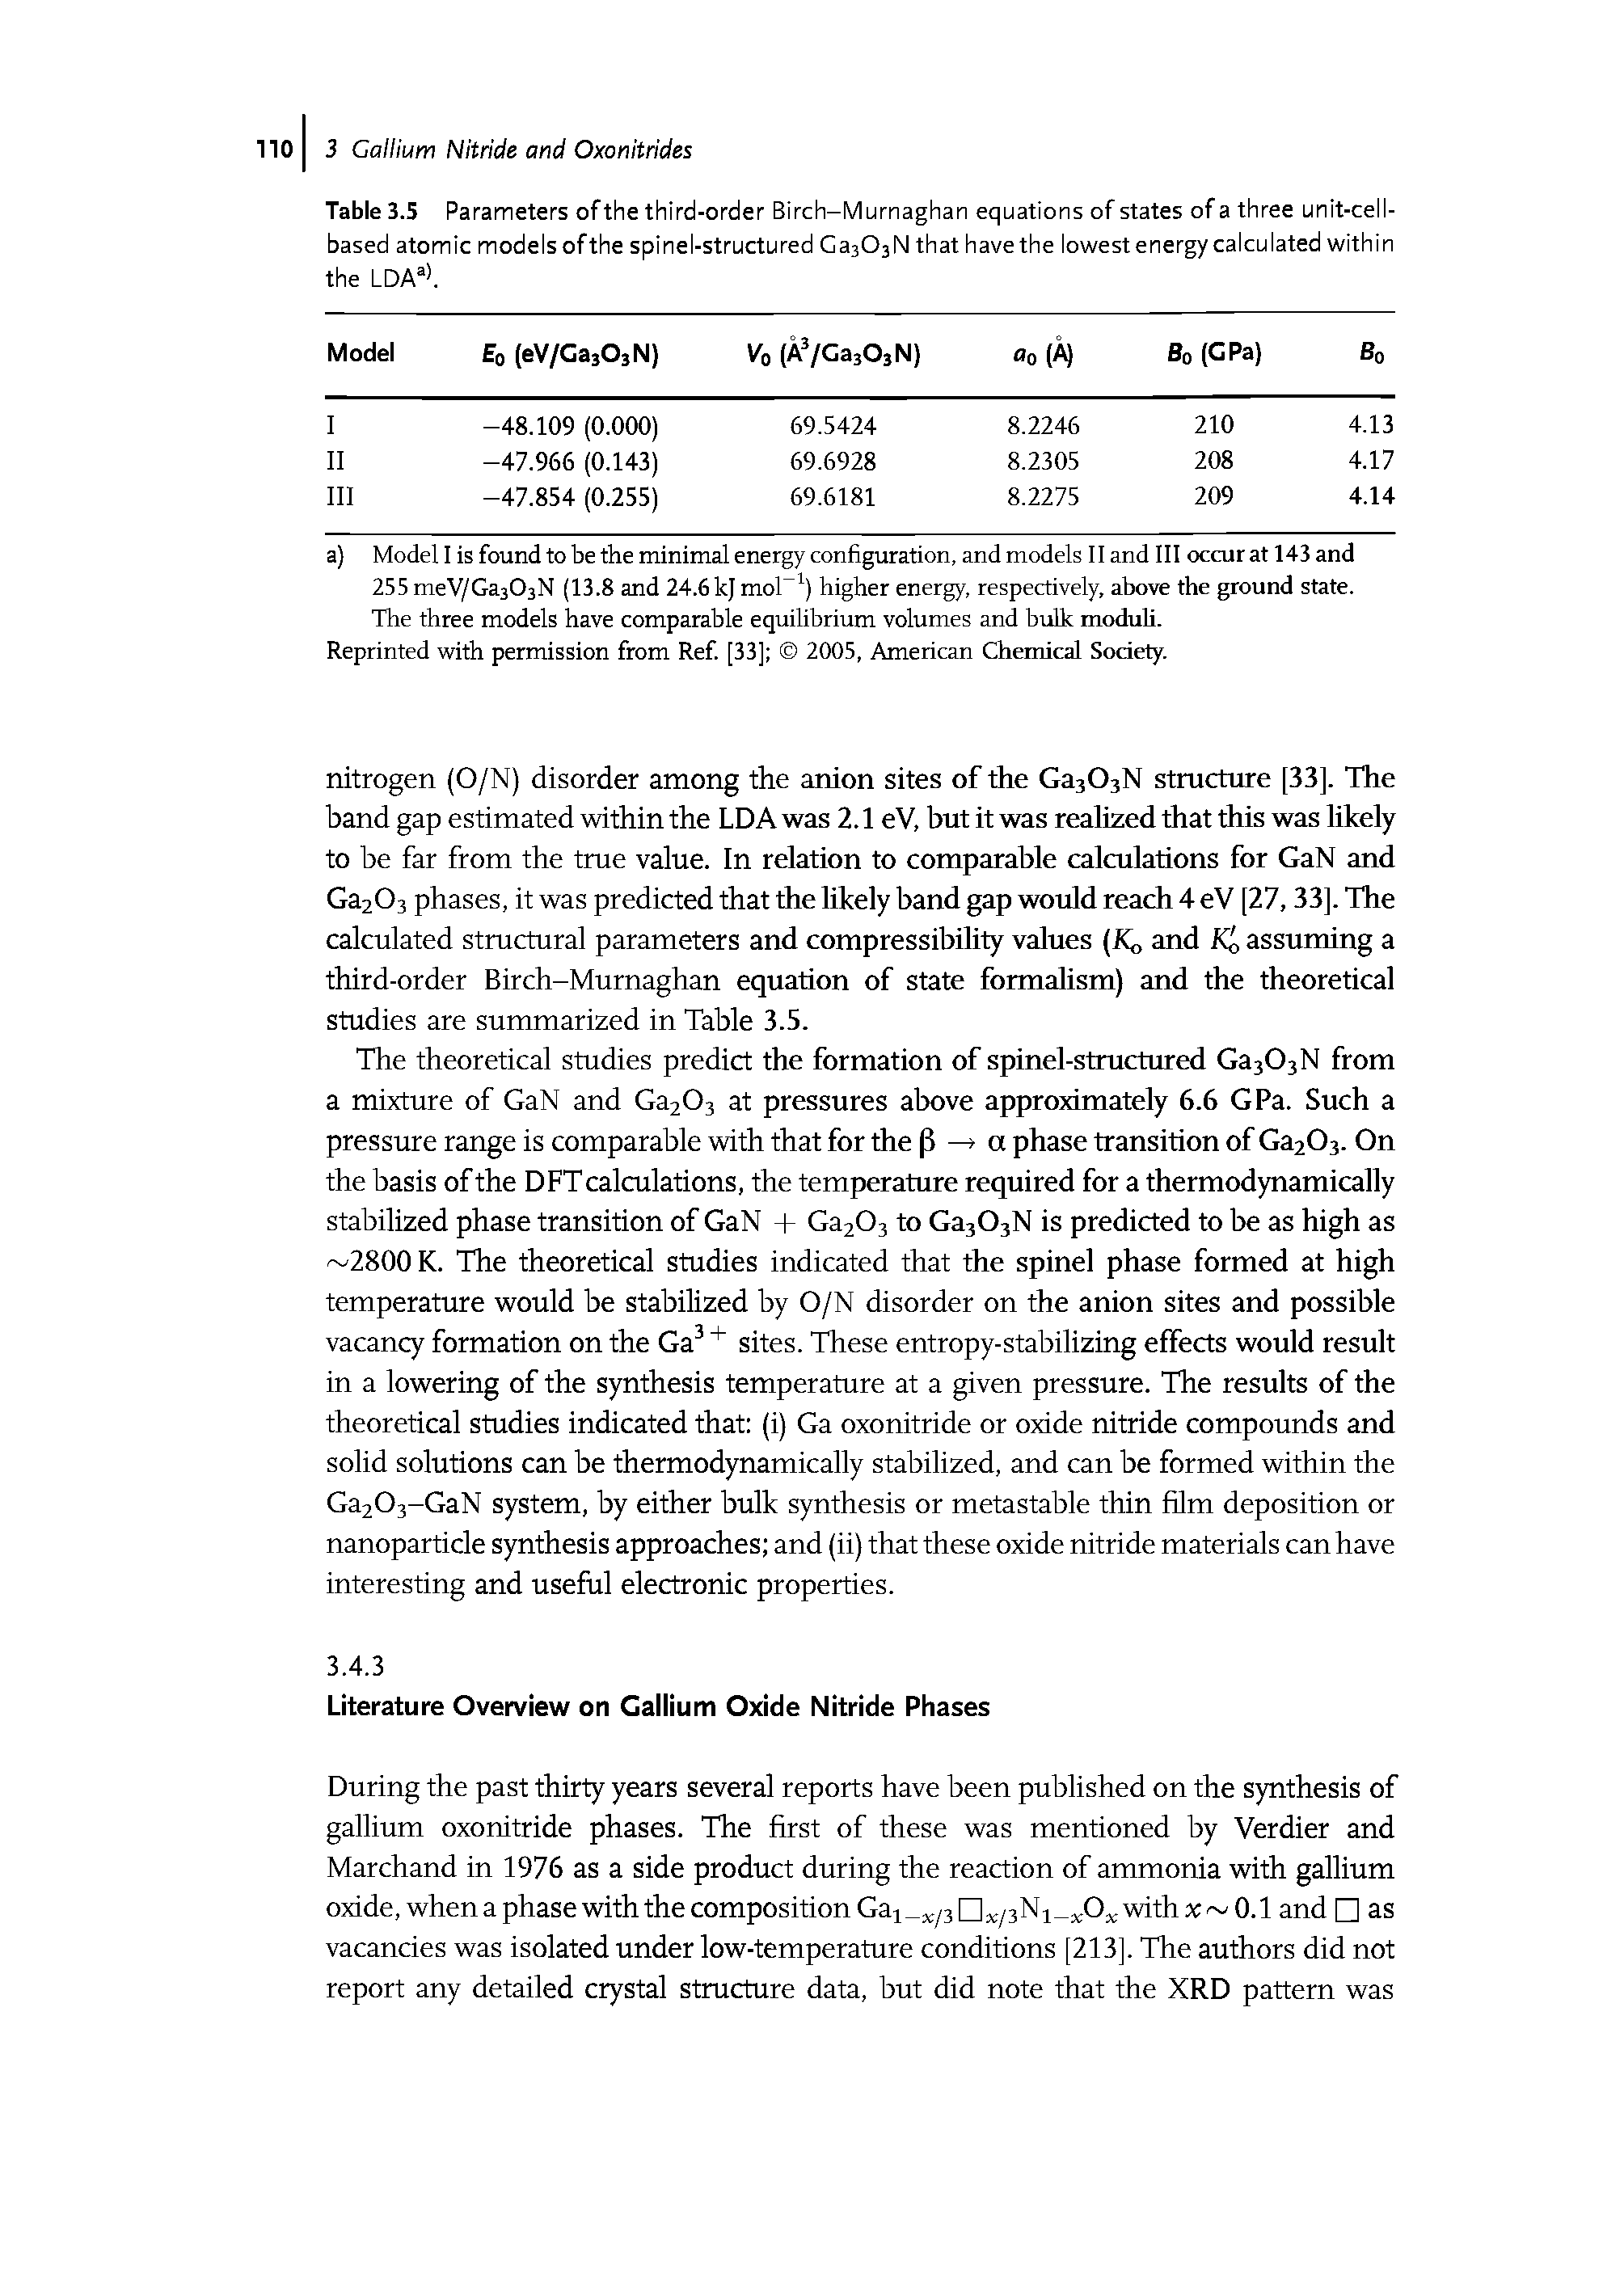 Table 3.5 Parameters of the third-order Birch-Murnaghan equations of states of a three unit-ceii-based atomic modeisofthe spinei-structured Ca303N that have the lowestenergy calculated within the LDA >.